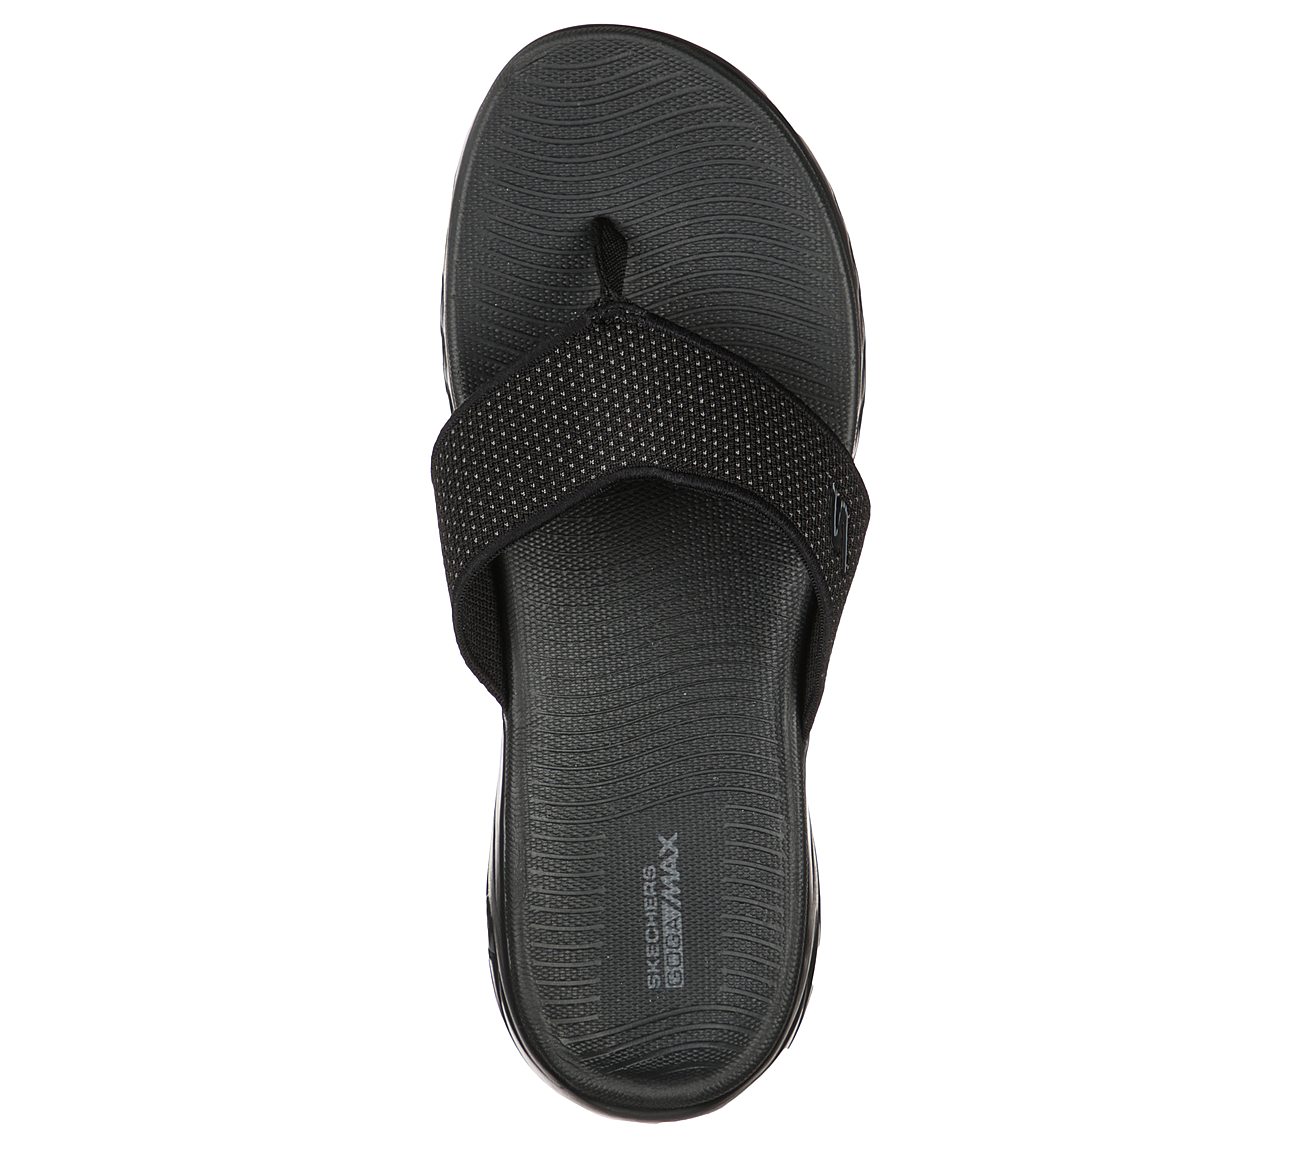 ON-THE-GO 600, BBLACK Footwear Top View